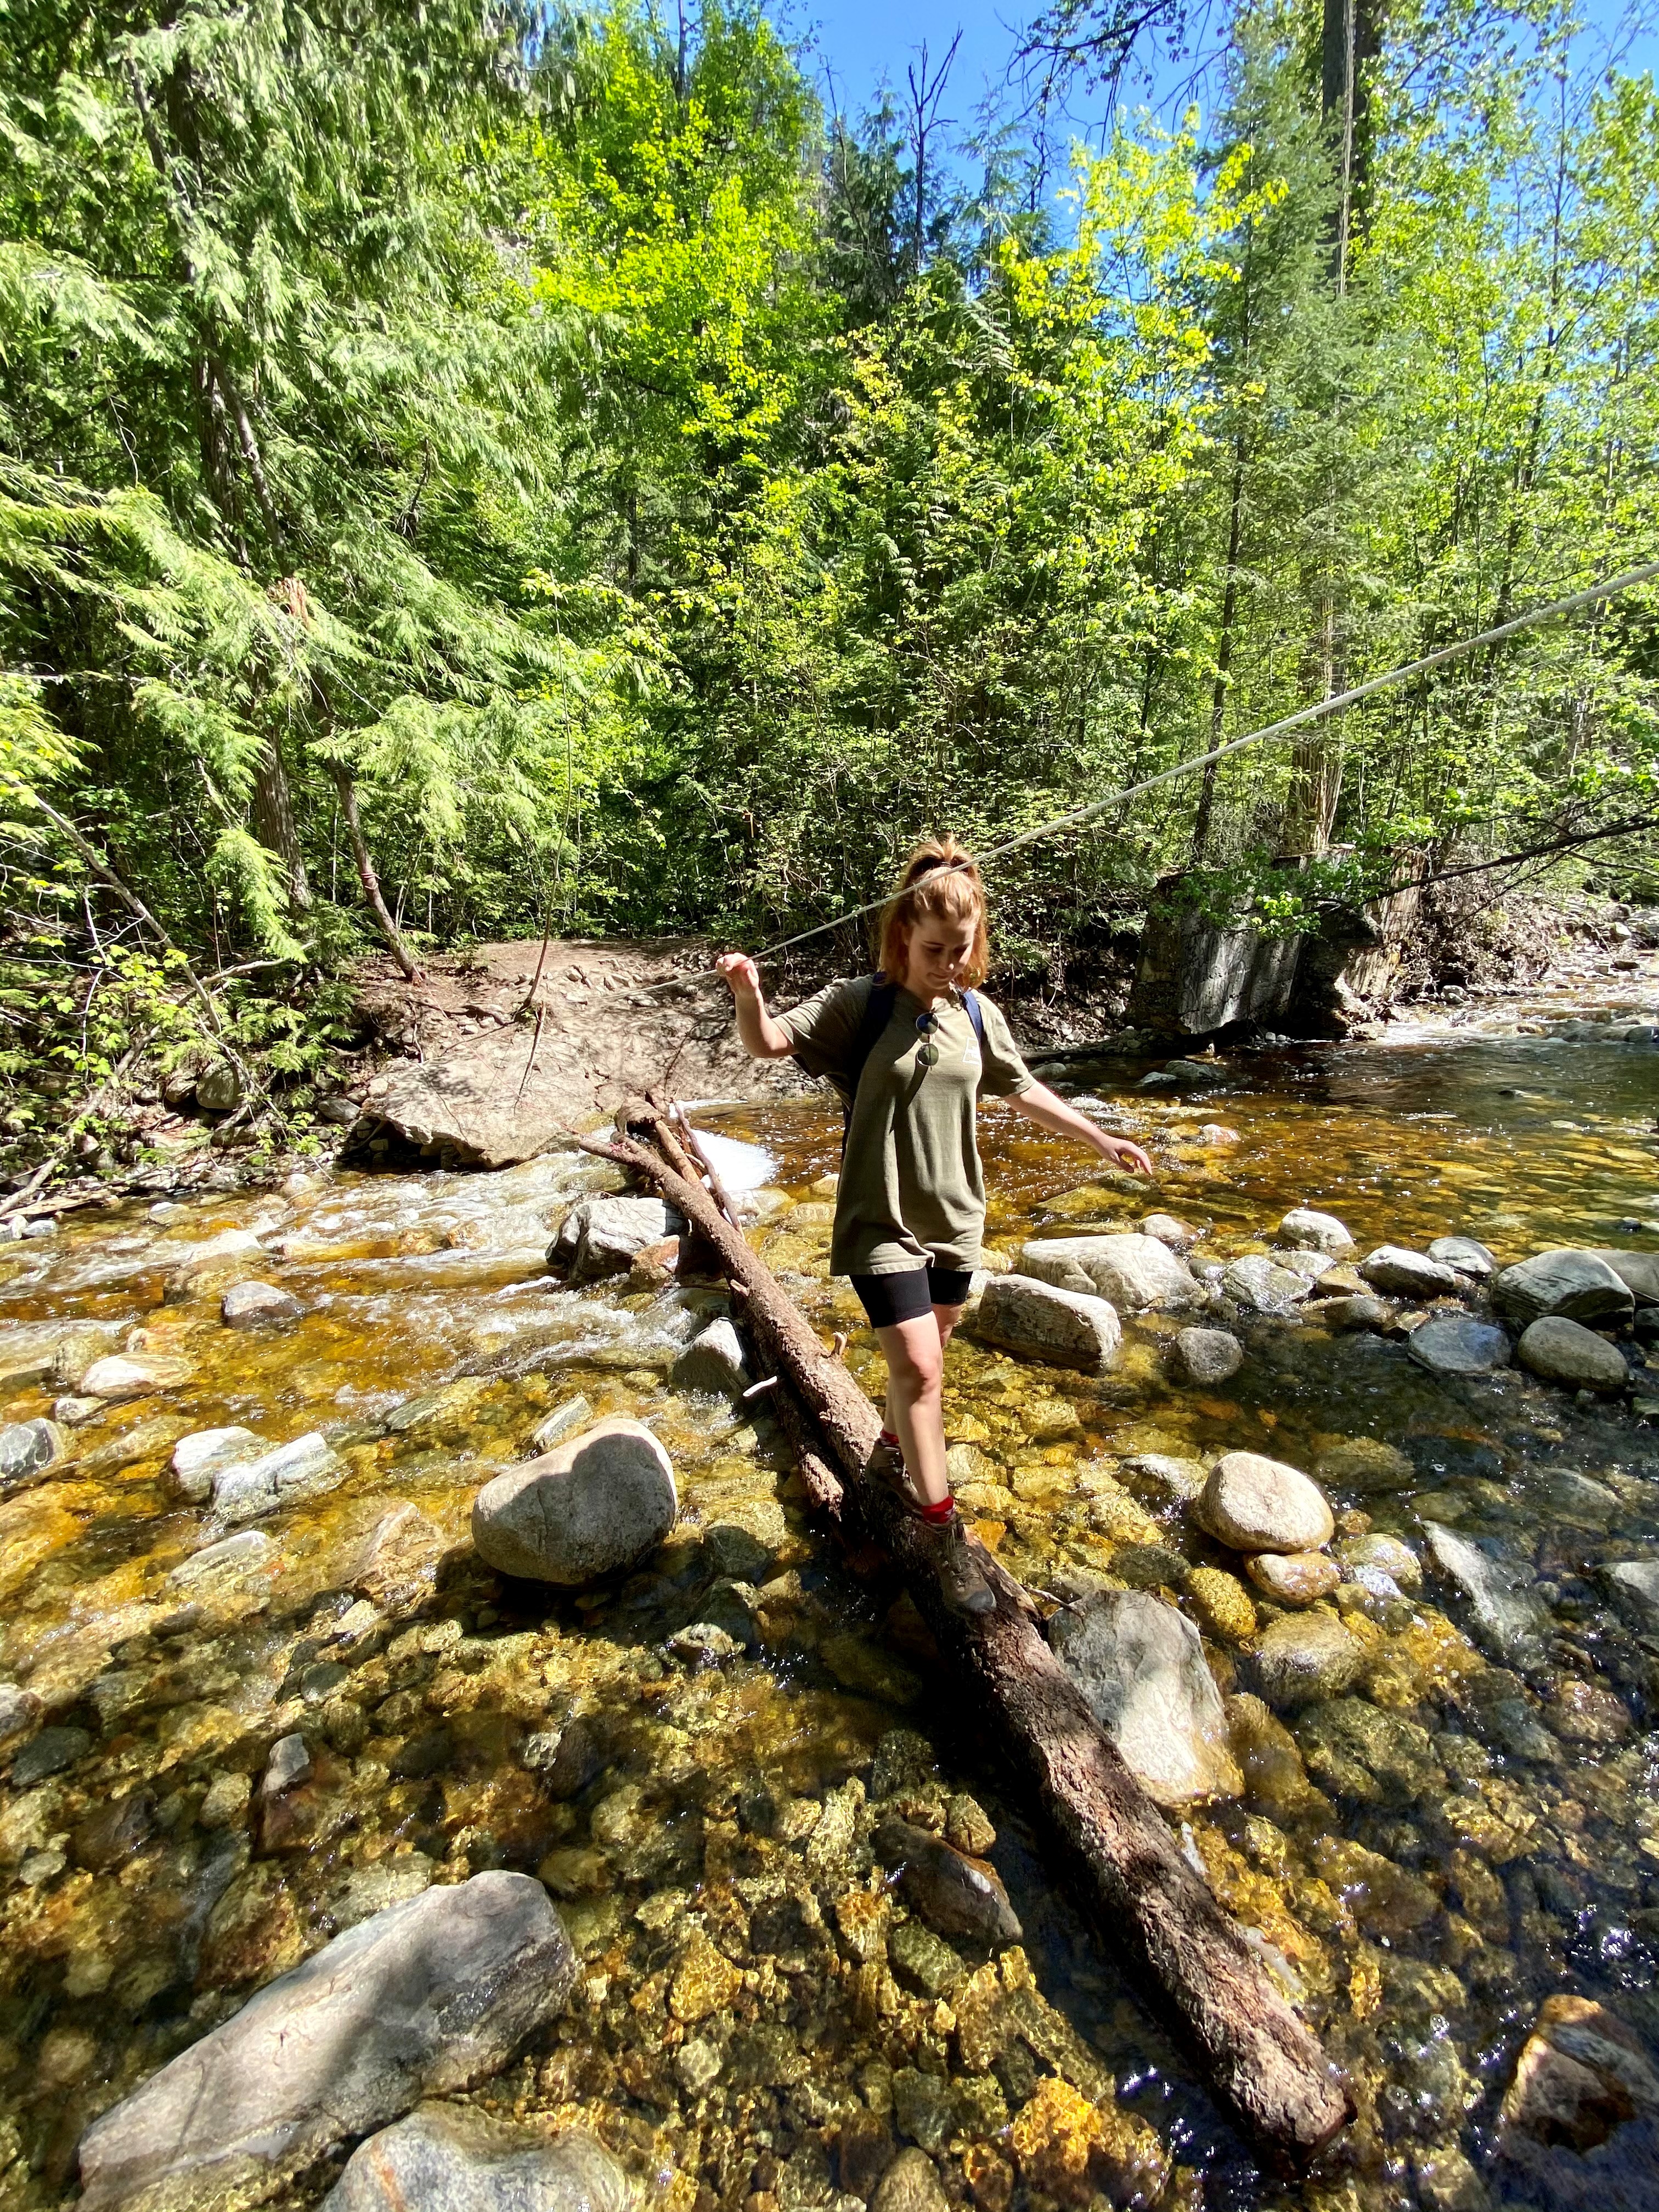 Young woman crossing a shallow stream by walking across a fallen tree.